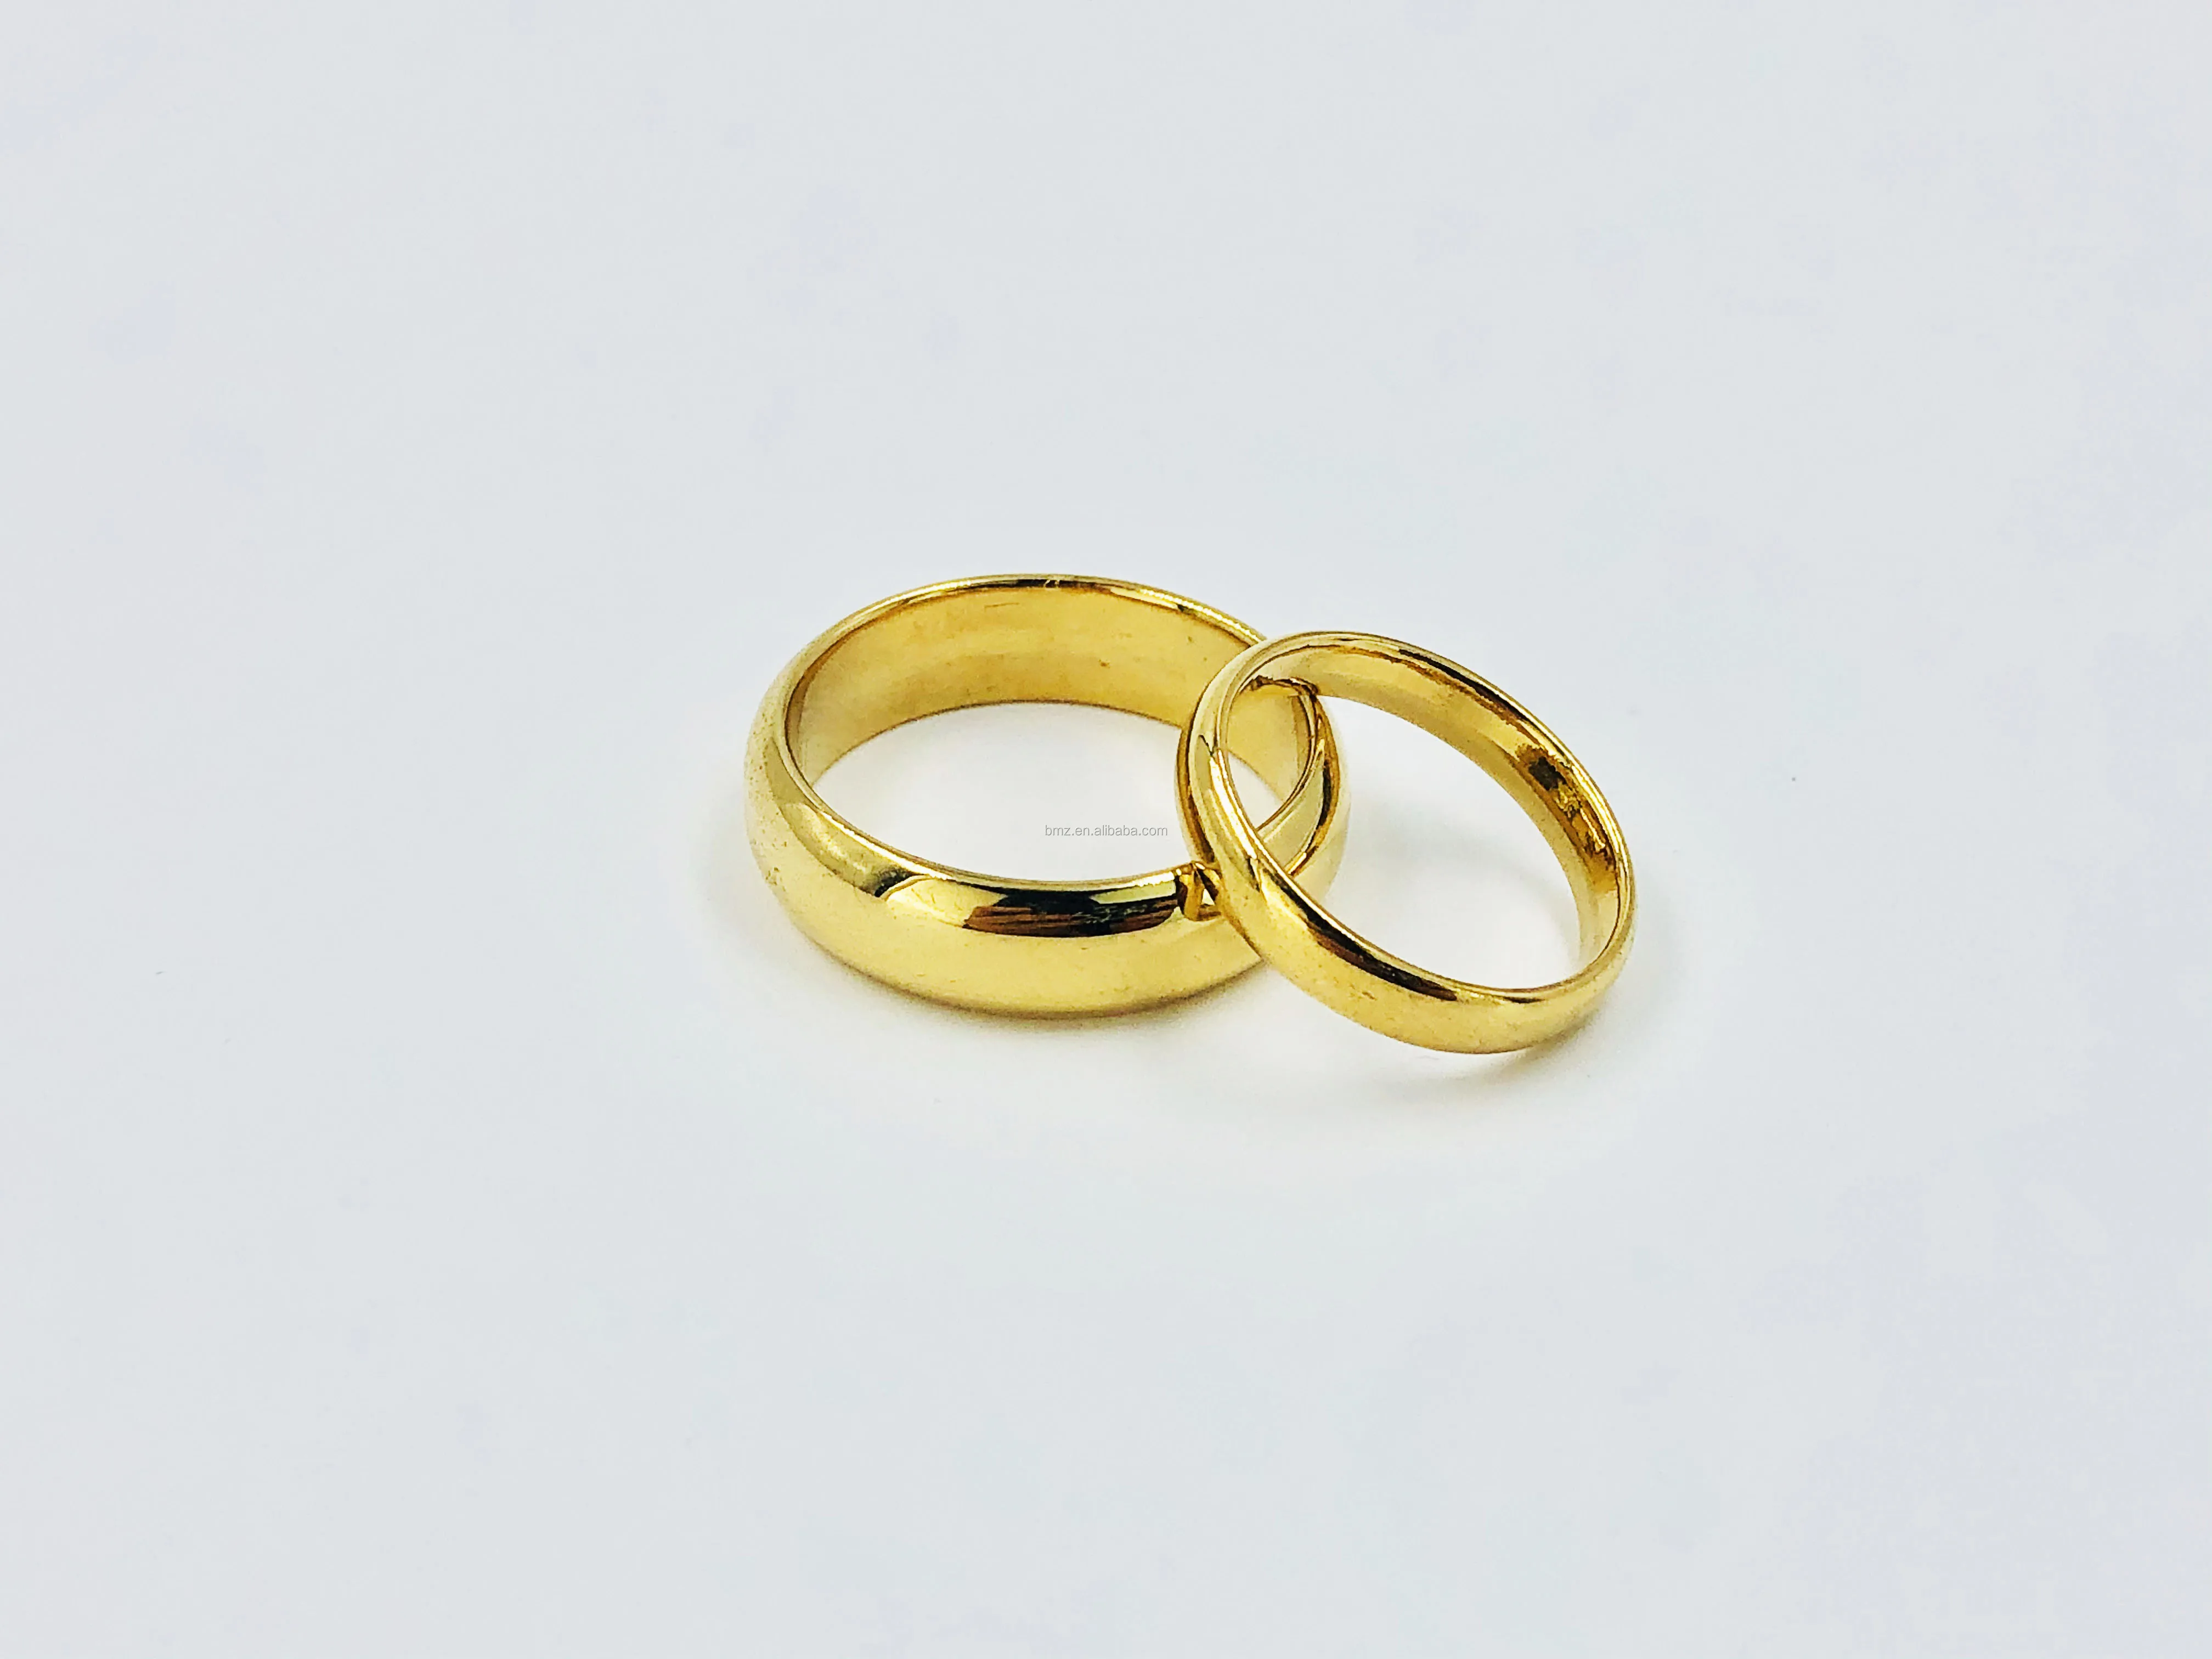 Wedding Ring Engagement Gold Ring Couple Stock Photo 1523384675 |  Shutterstock